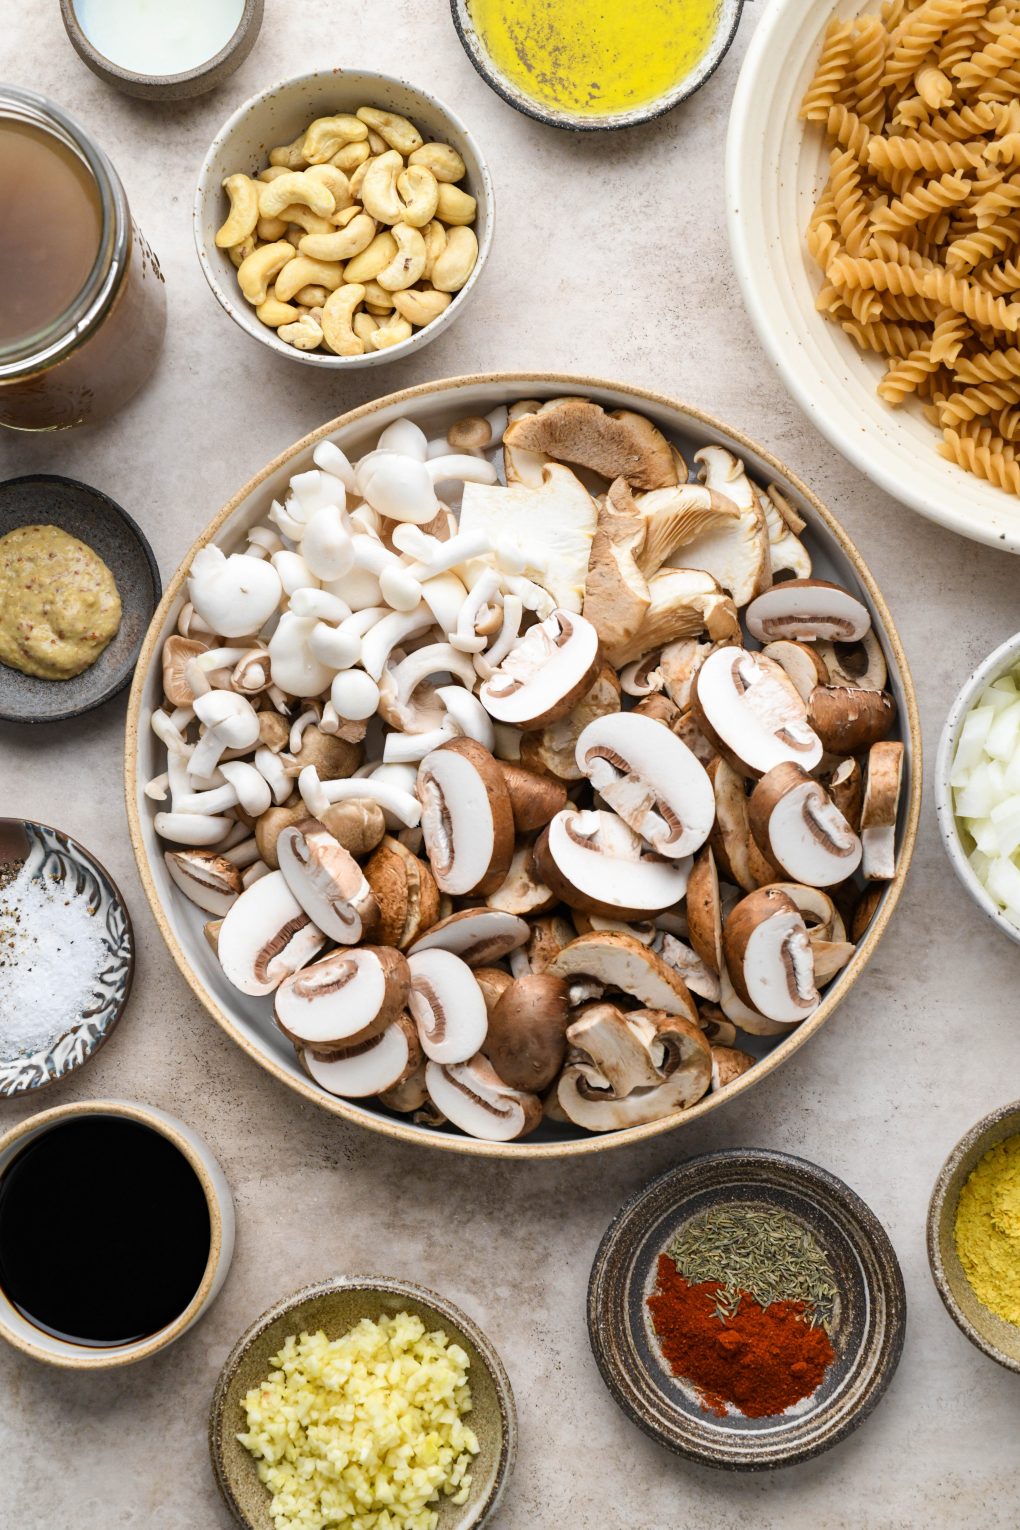 Ingredients for vegan mushroom stroganoff in various ceramic bowls and dishes on a light brown background. 